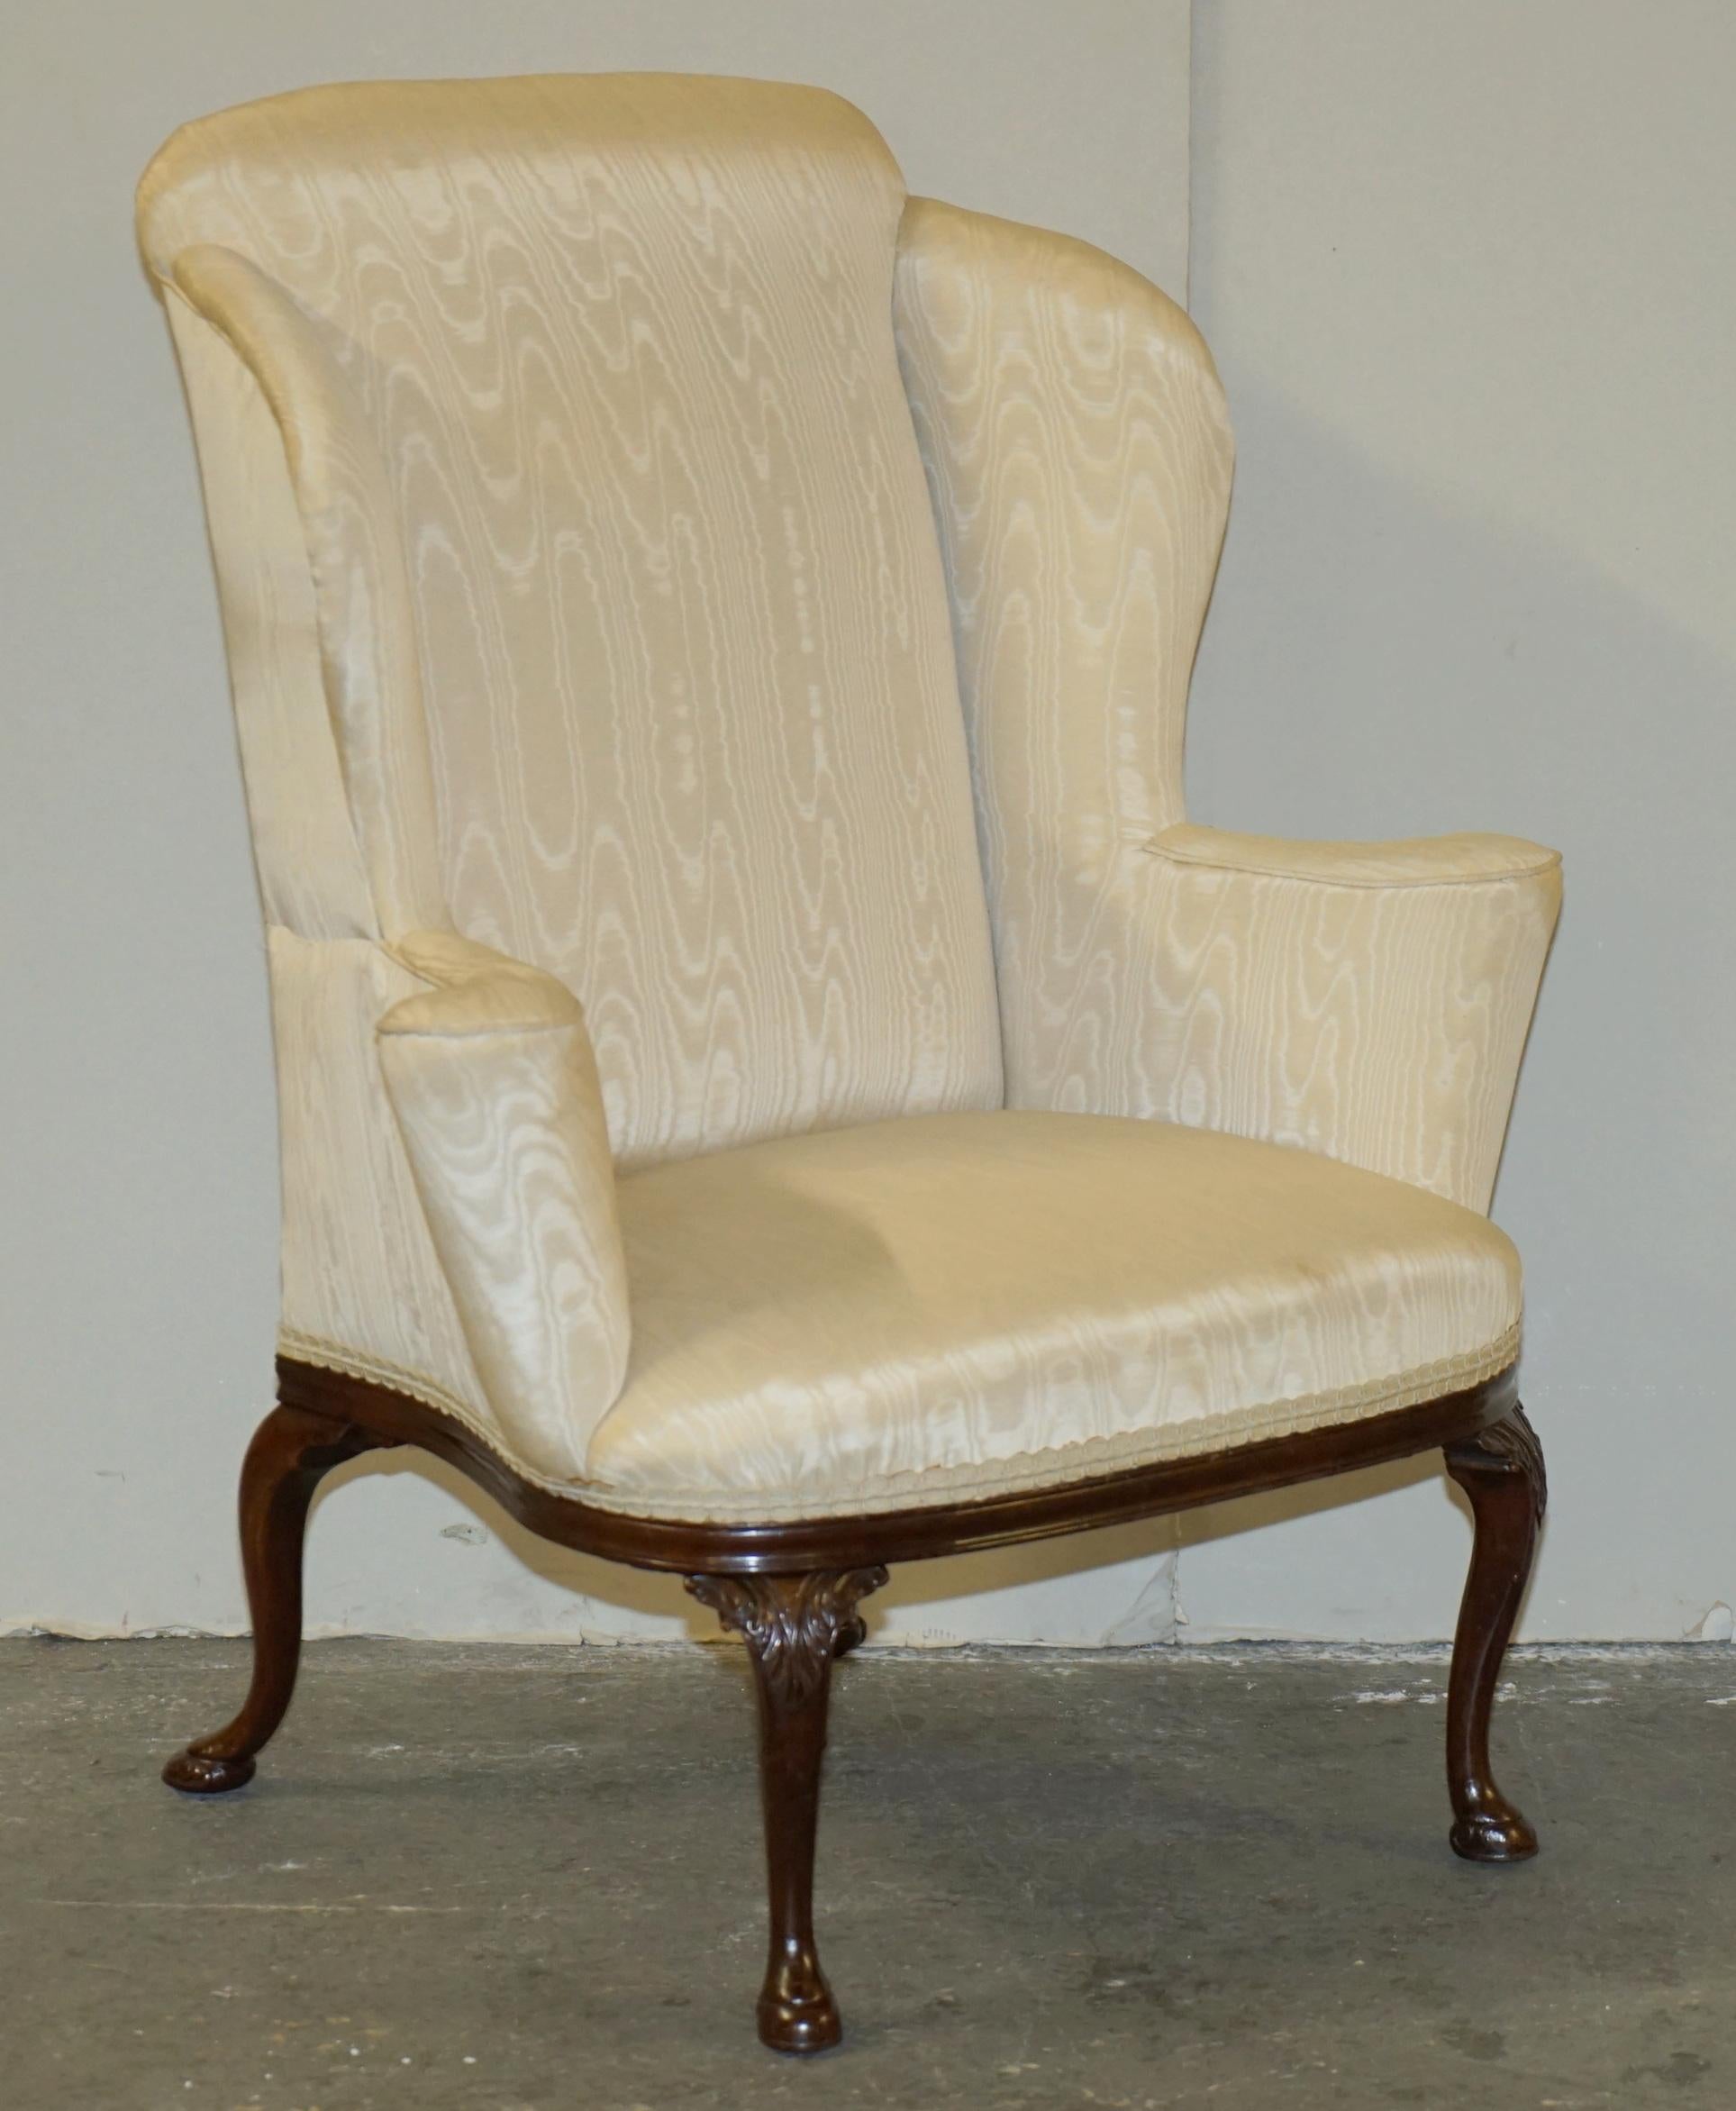 Royal House Antiques

Royal House Antiques is delighted to offer for sale this absolutely exquisite pair of mid Victorian circa 1870 William Morris style wingback armchairs with ornately carved mahogany frames that make ideal reupholstery projects